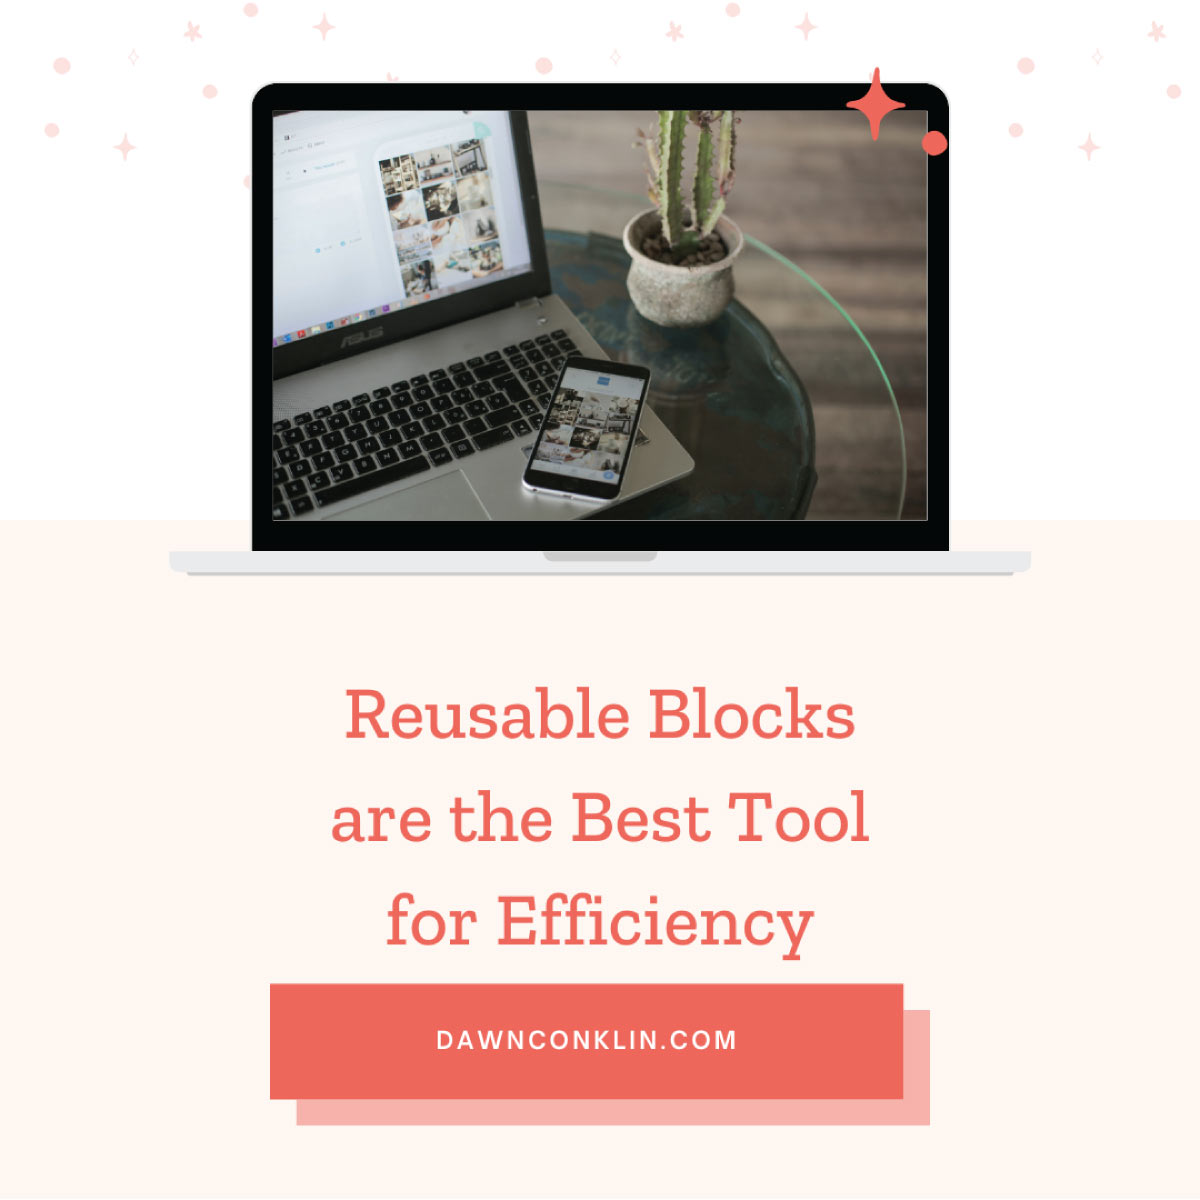 Reusable blocks are the best tool for efficiency with an image of a computer on a desk.